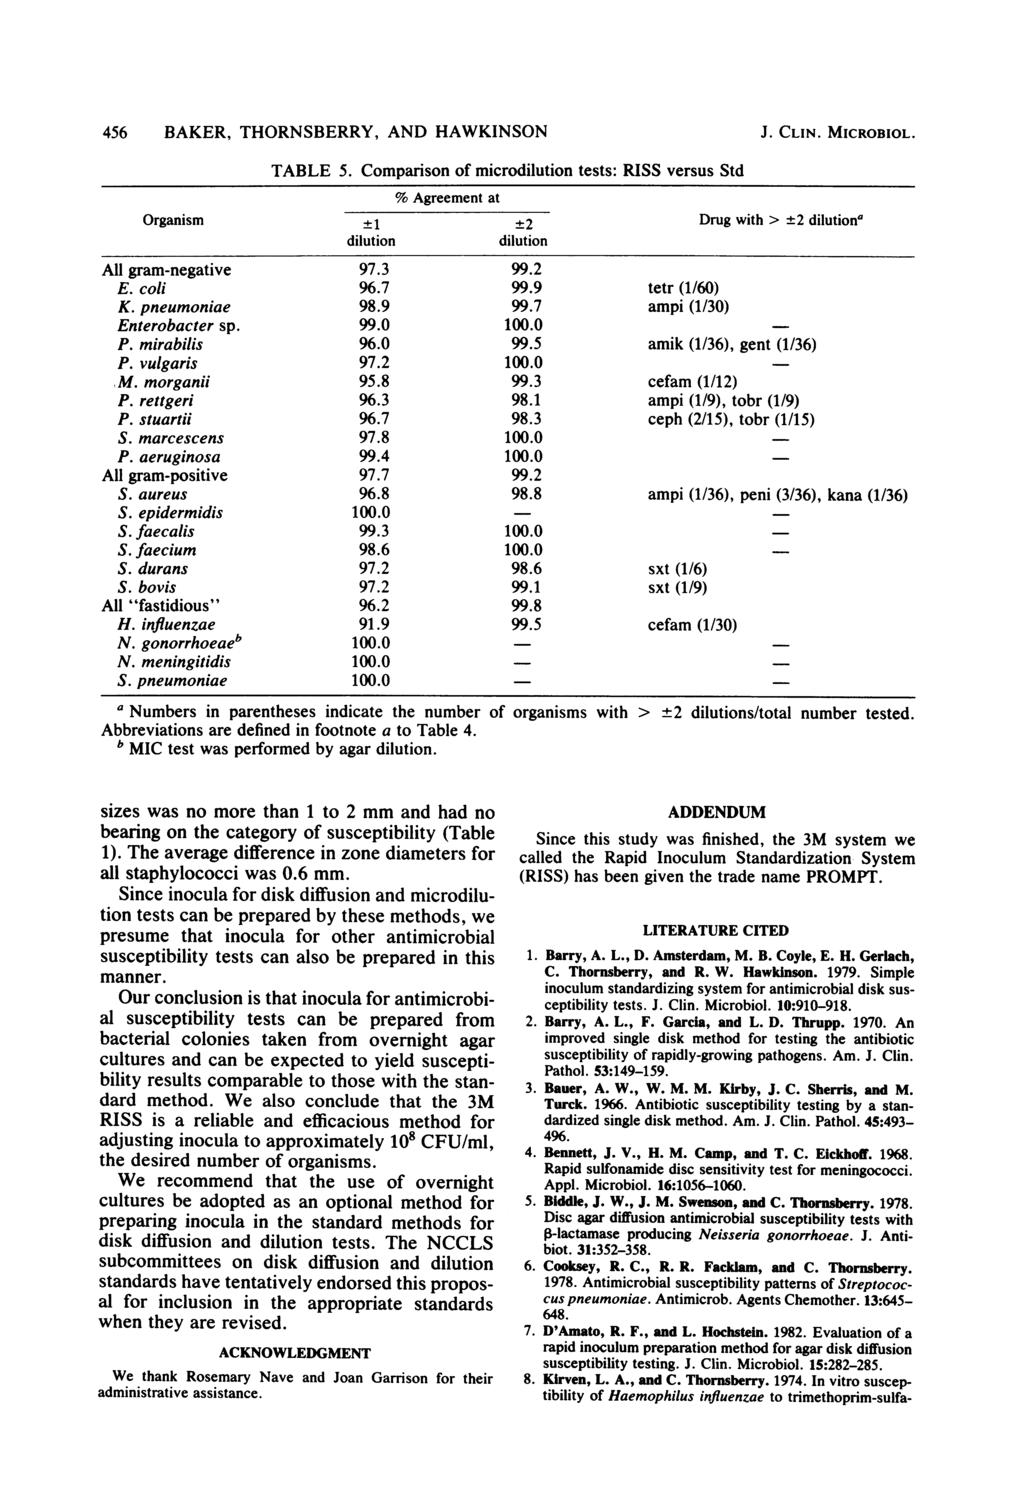 456 BAKER, THORNSBERRY, AND HAWKINSON TABLE 5. Comparison of microdilution tests: RISS versus Std % Agreement at Organism ±1 ±2 Drug with > ±2 dilutiona dilution dilution All gram-negative 97.3 99.